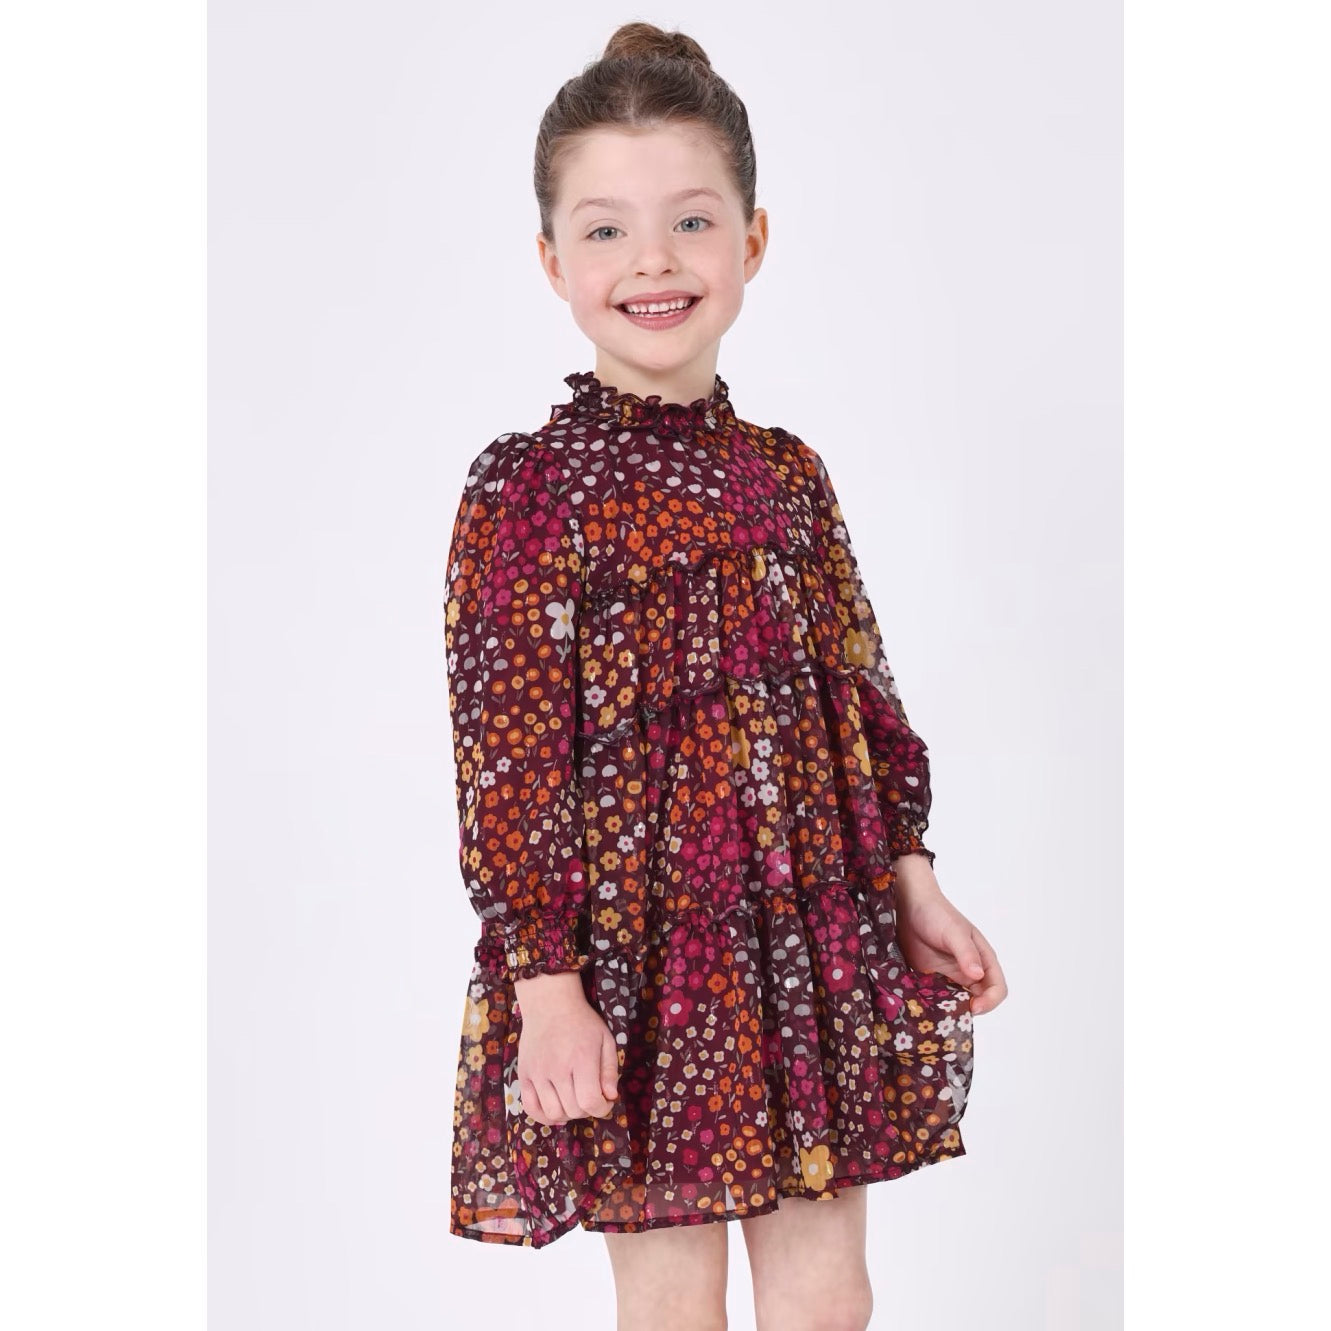 Mayoral Girls Dress 4920 Berry Clothing 3YRS / Berry,4YRS / Berry,5YRS / Berry,6YRS / Berry,7YRS / Berry,8YRS / Berry,9YRS / Berry